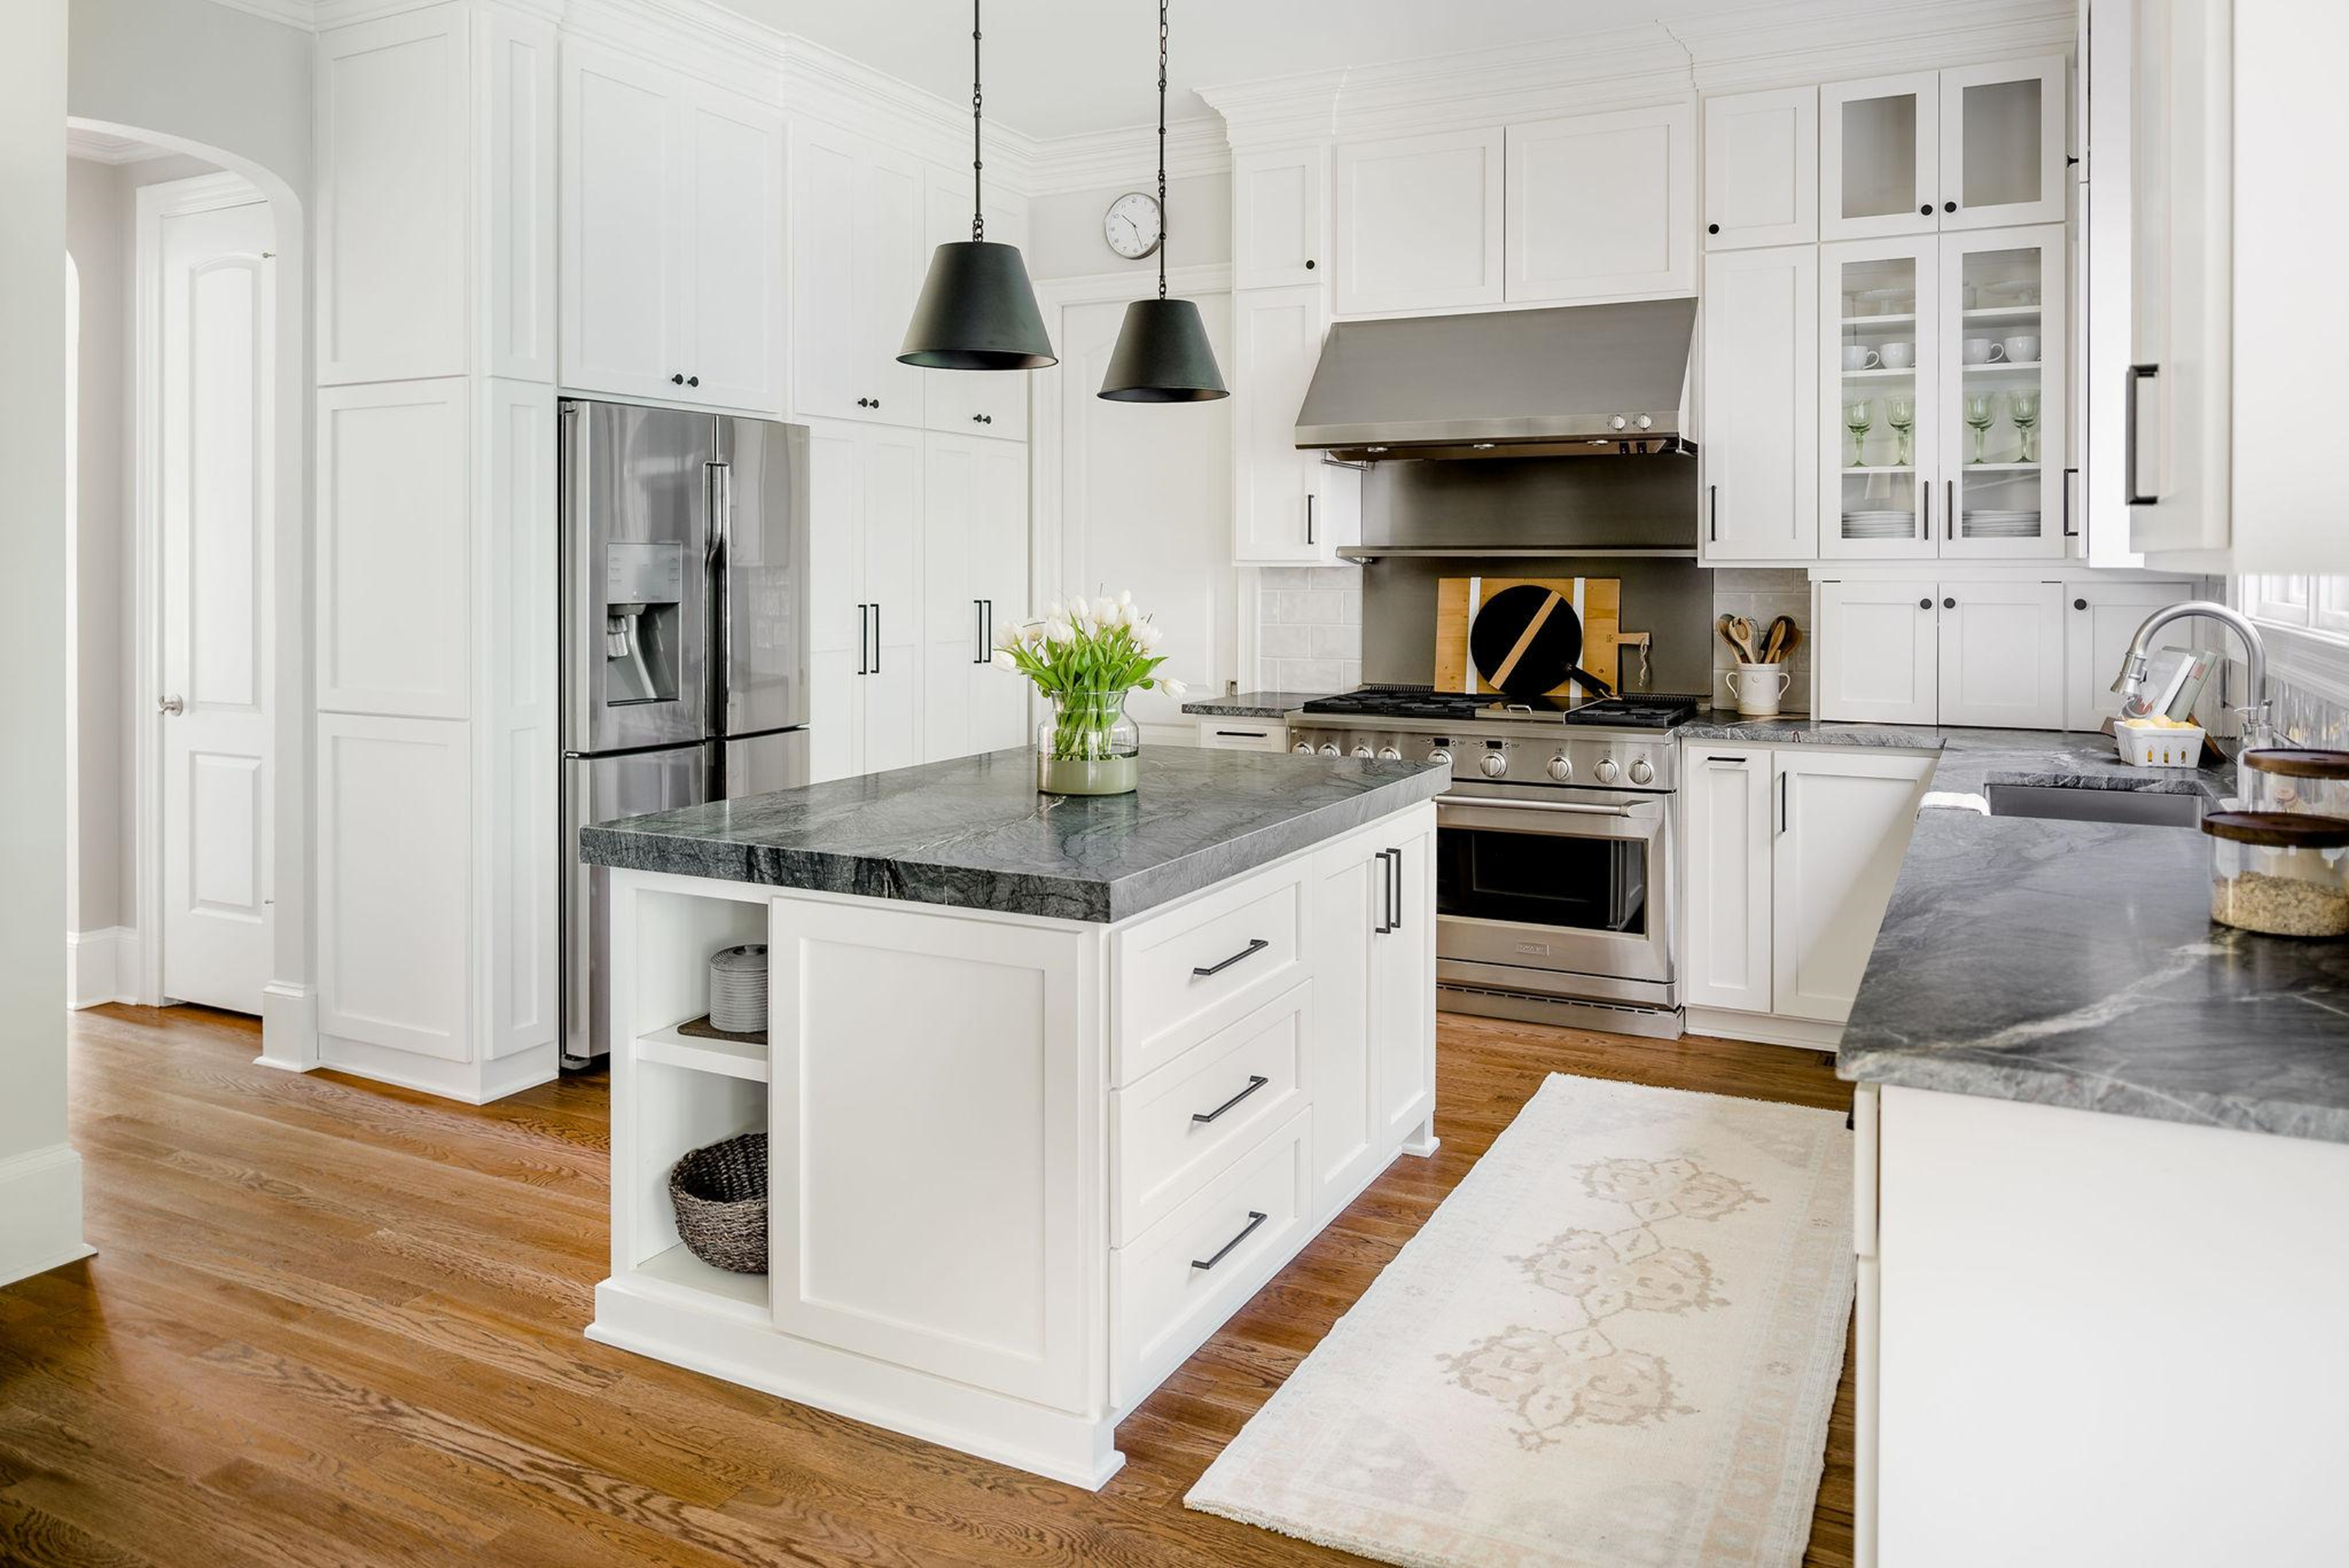 White kitchen with grey marble countertops and stainless steel appliances